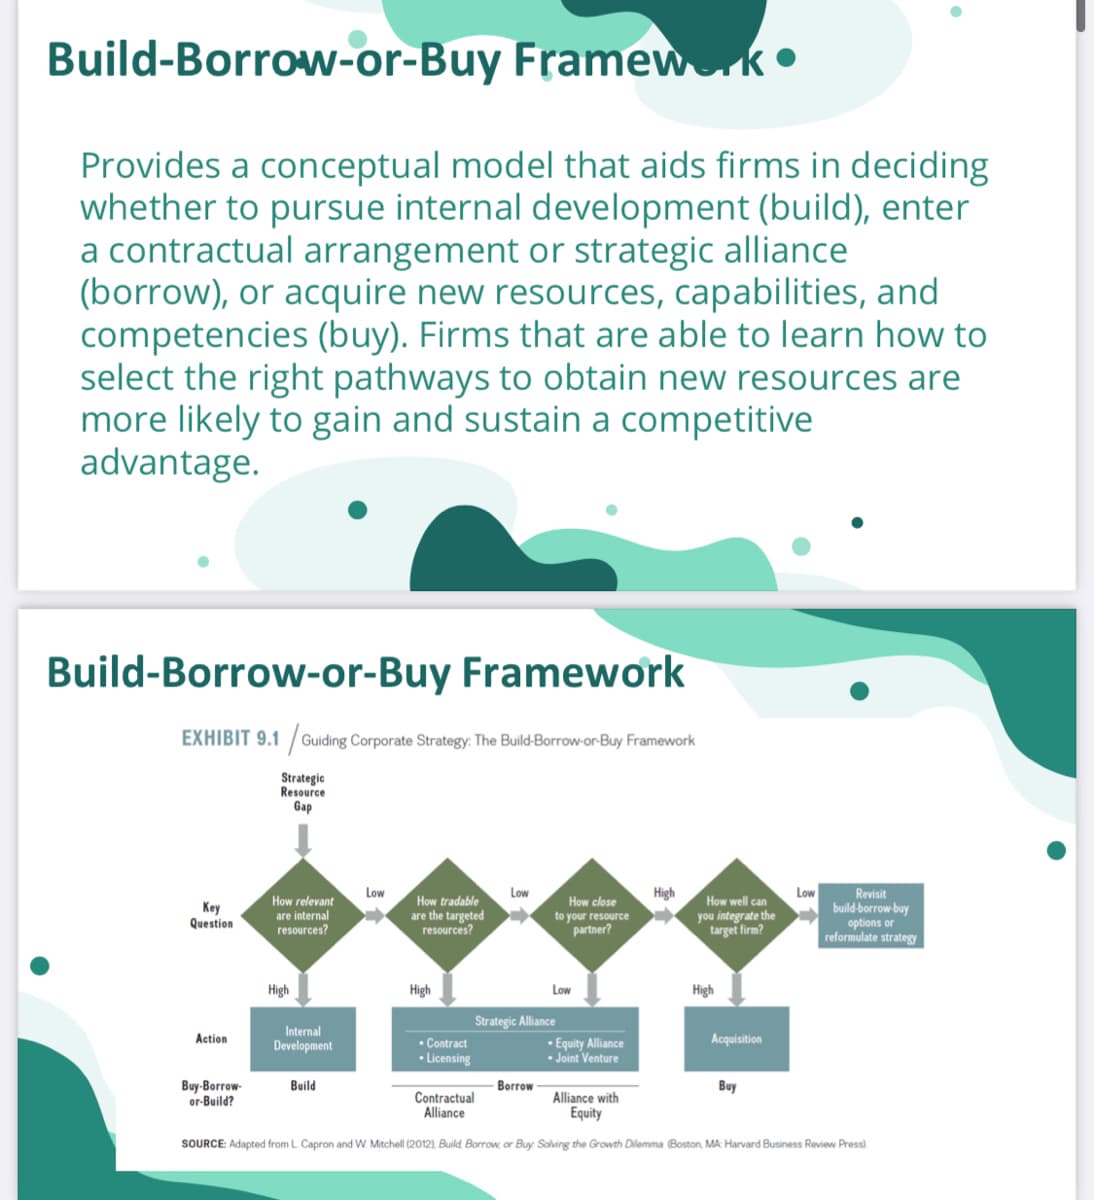 Build-Borrow-or-Buy Framewk•
Provides a conceptual model that aids firms in deciding
whether to pursue internal development (build), enter
a contractual arrangement or strategic alliance
(borrow), or acquire new resources, capabilities, and
competencies (buy). Firms that are able to learn how to
select the right pathways to obtain new resources are
more likely to gain and sustain a competitive
advantage.
Build-Borrow-or-Buy Framework
EXHIBIT 9.1 / Guiding Corporate Strategy: The Build-Borrow-or-Buy Framework
Strategic
Resource
Gap
Low
Low
High
Low
Revisit
How relevant
are internal
resources?
How tradable
are the targeted
resources?
How close
How well can
Key
Question
to your resource
partner?
you integrate the
target firm?
options or
reformulate strategy
build-borrow-buy
High
High
Low
High
Strategic Alliance
Internal
Development
Action
Acquisition
• Contract
• Licensing
· Equity Alliance
• Joint Venture
Buy-Borrow-
or-Build?
Build
Borrow
Buy
Contractual
Alliance
Alliance with
Equity
SOURCE: Adapted from L Capron and w. Mitchell (2012). Build. Borrow, or Buy Solving the Growth Dilemma (Boston, MA: Harvard Business Review Press)
